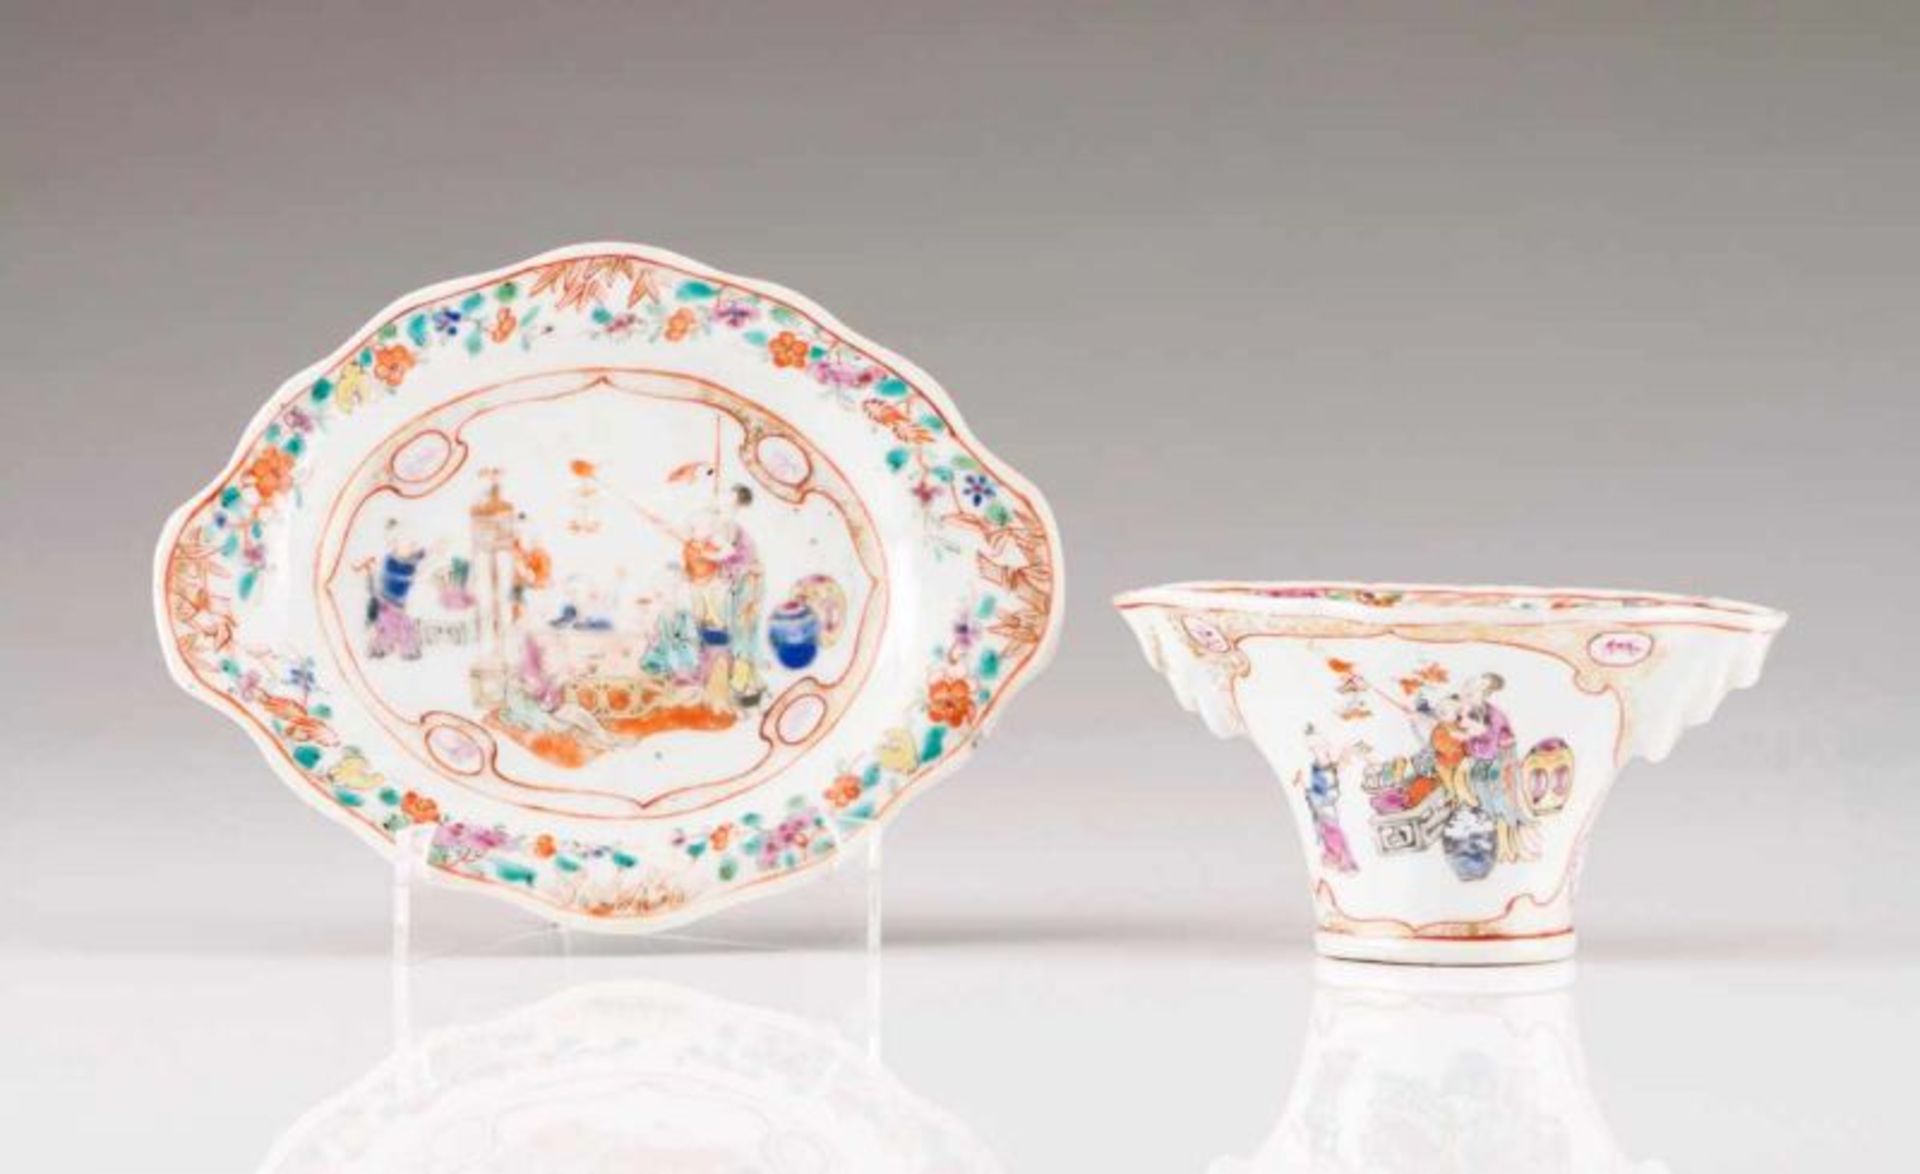 A libation cup with stand Chinese export porcelain Polychrome and gilt Famille Rose decoration